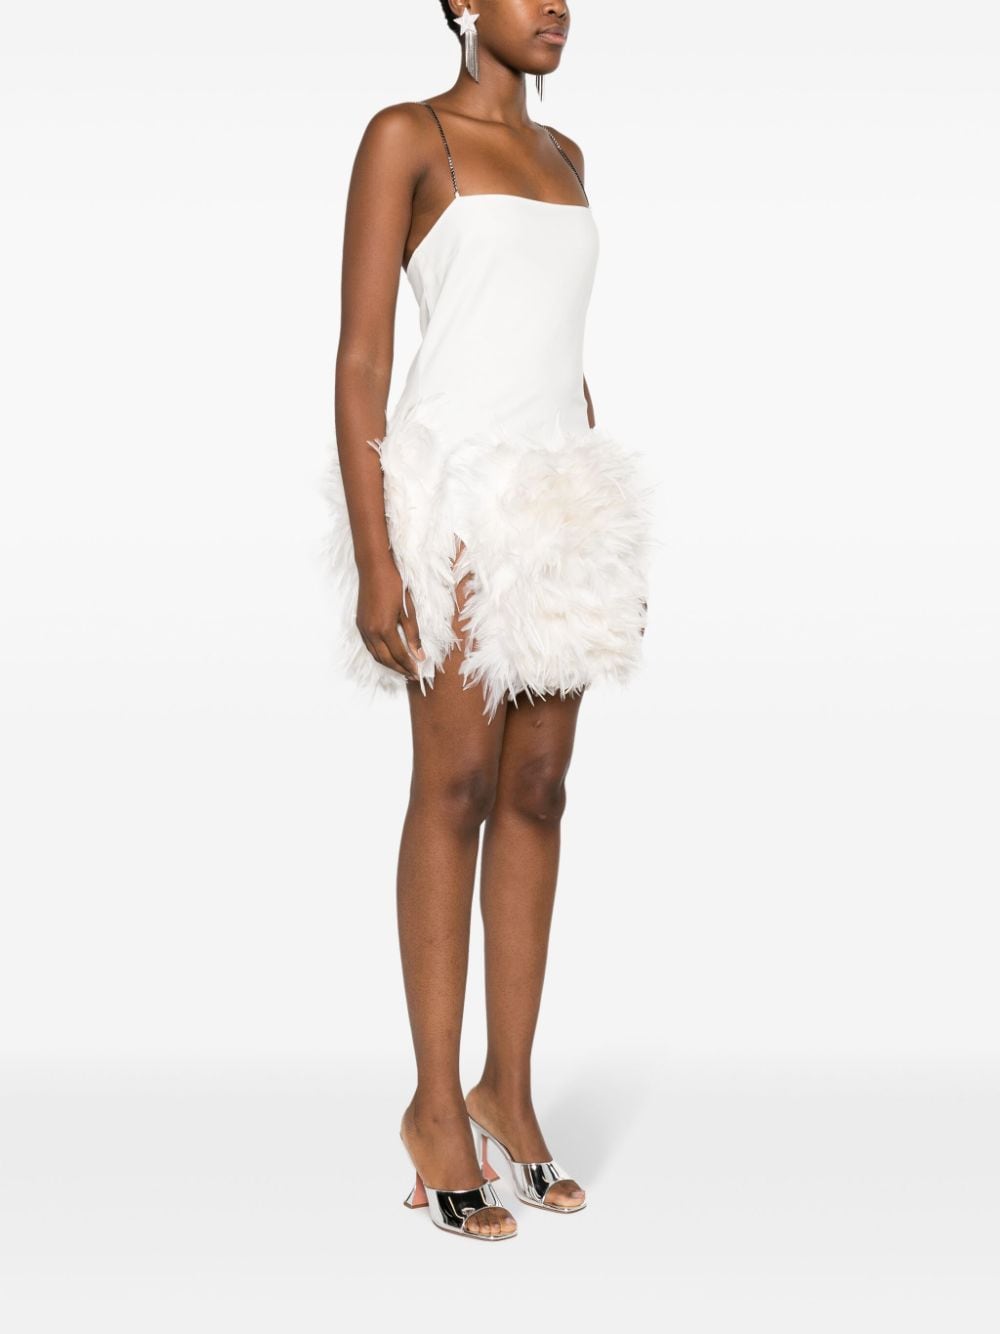 Short dress with feather detailing on the bottom